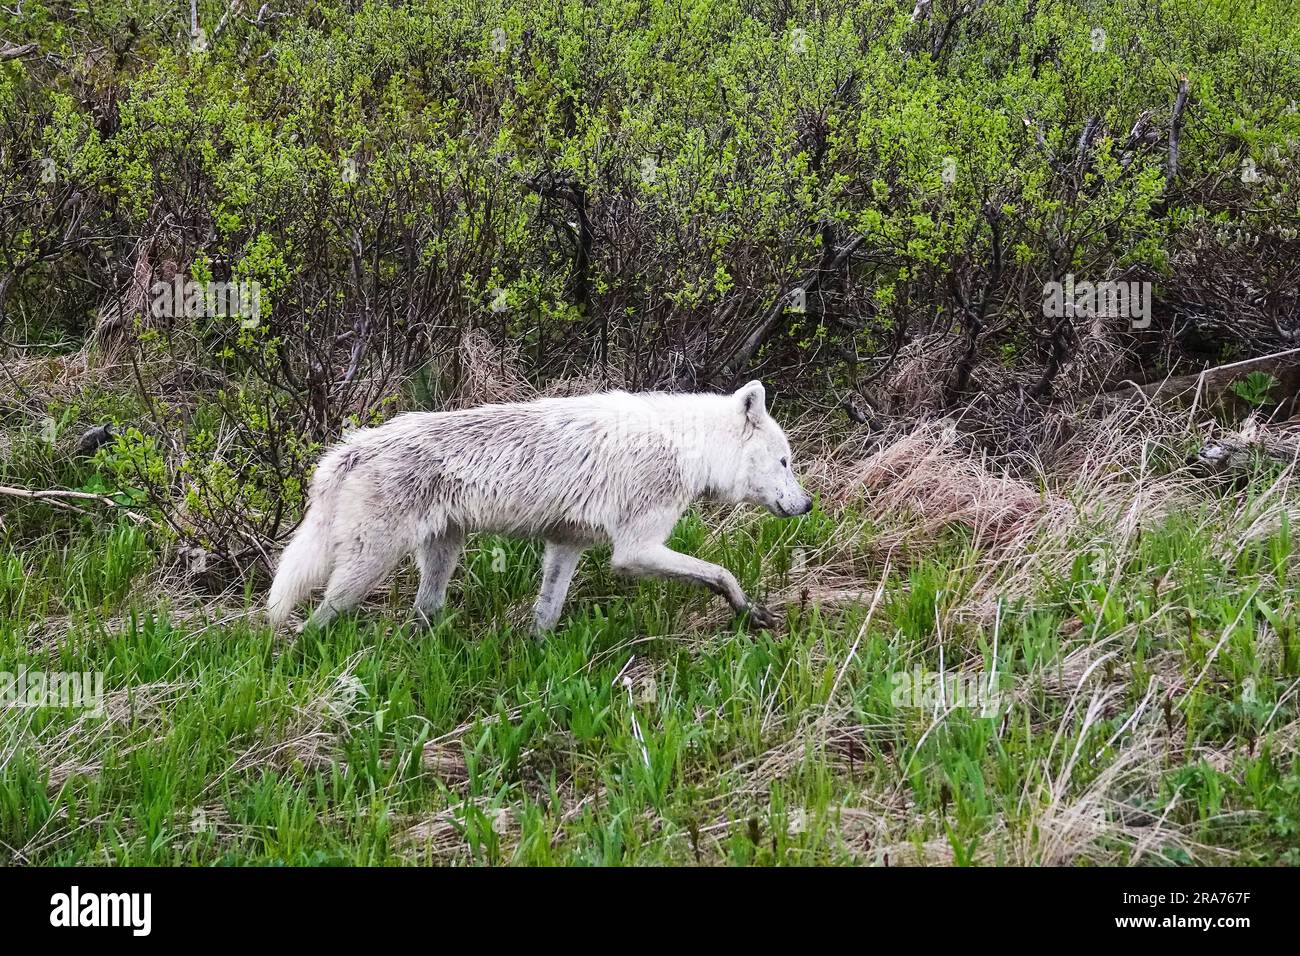 A lone white colored grey wolf explores the edge of the alders for food at the remote McNeil River Wildlife Refuge, June 17, 2023 on the Katmai Peninsula, Alaska. The remote site is accessed only with a special permit and contains the world’s largest seasonal population of brown bears and other wildlife in a pristine environment. Stock Photo